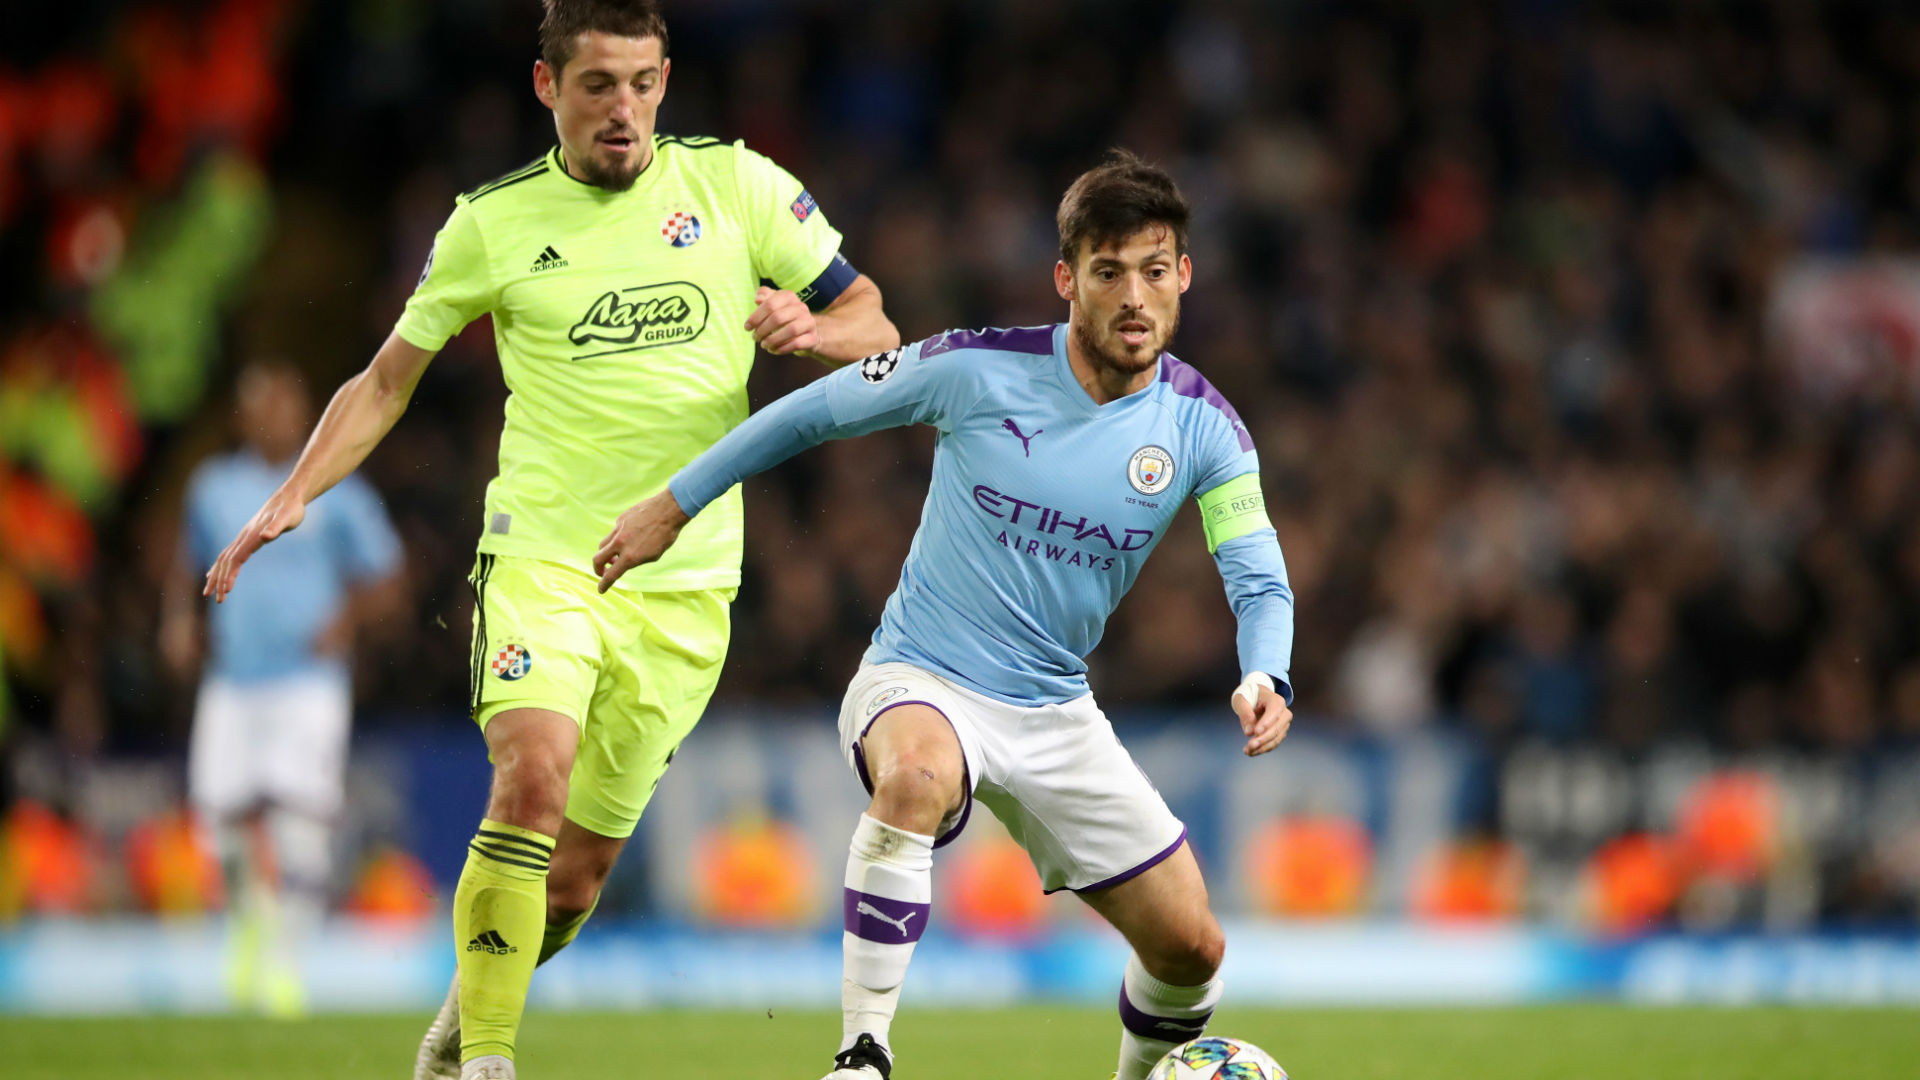 David Silva has won most major honours going for club and country, but the Champions League has eluded him and Manchester City.